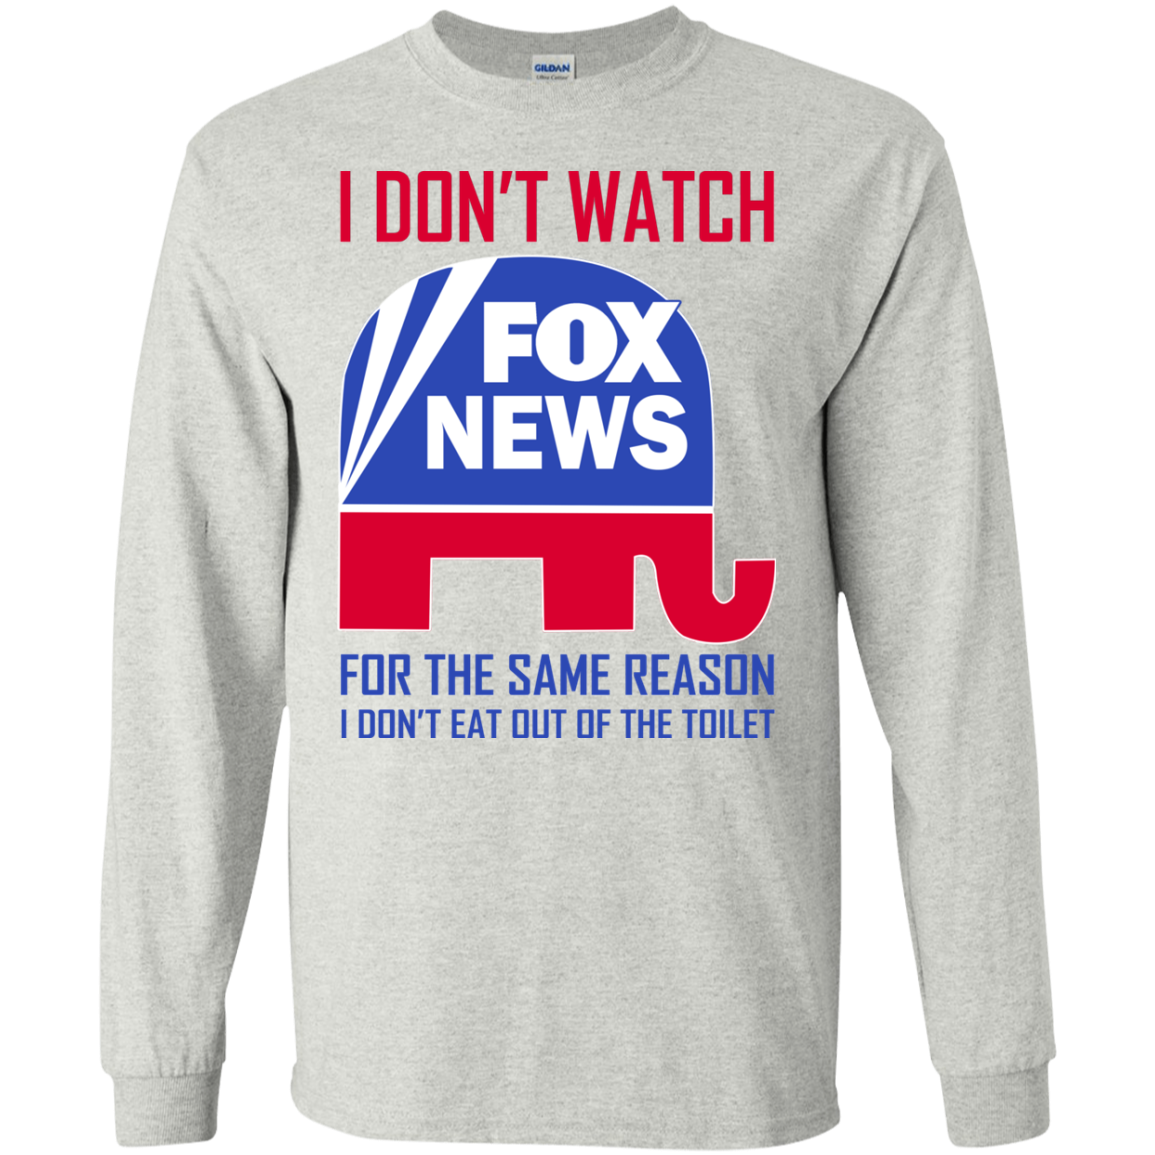 I don’t watch fox news for the same reason i don’t eat out of the toilet shirt 2